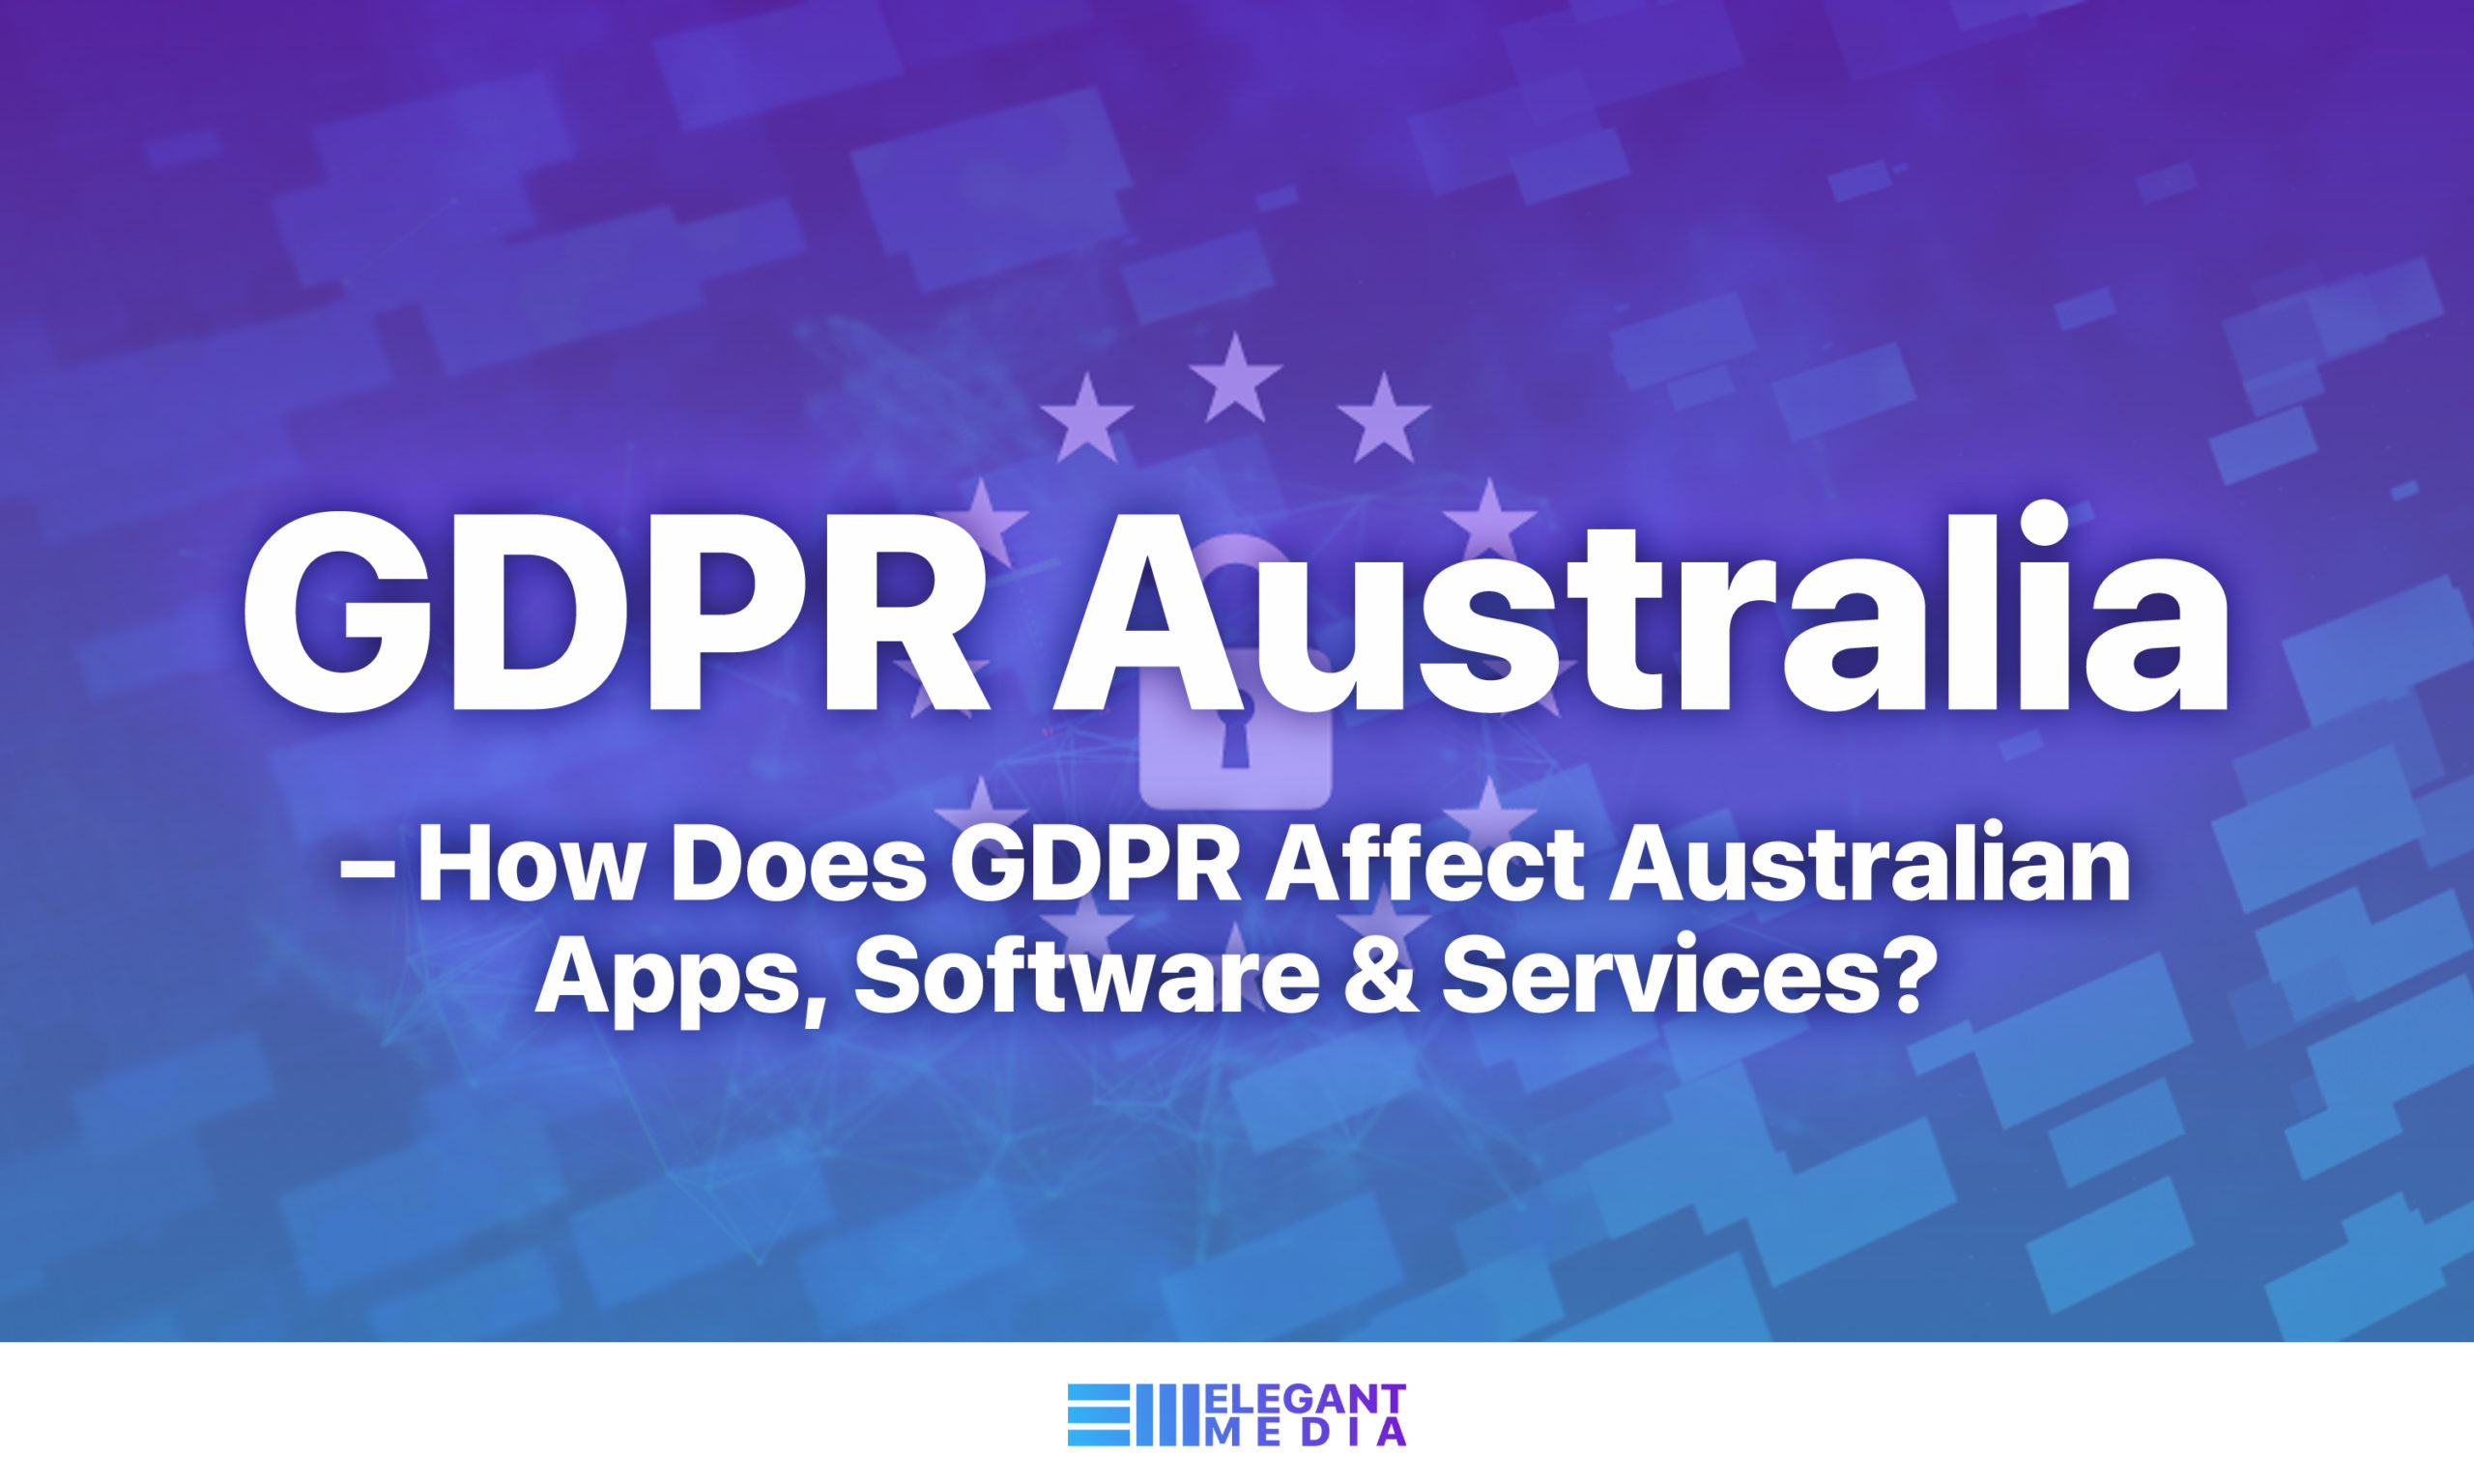 GDPR Australia – How Does GDPR Affect Australian Apps, Software & Services?